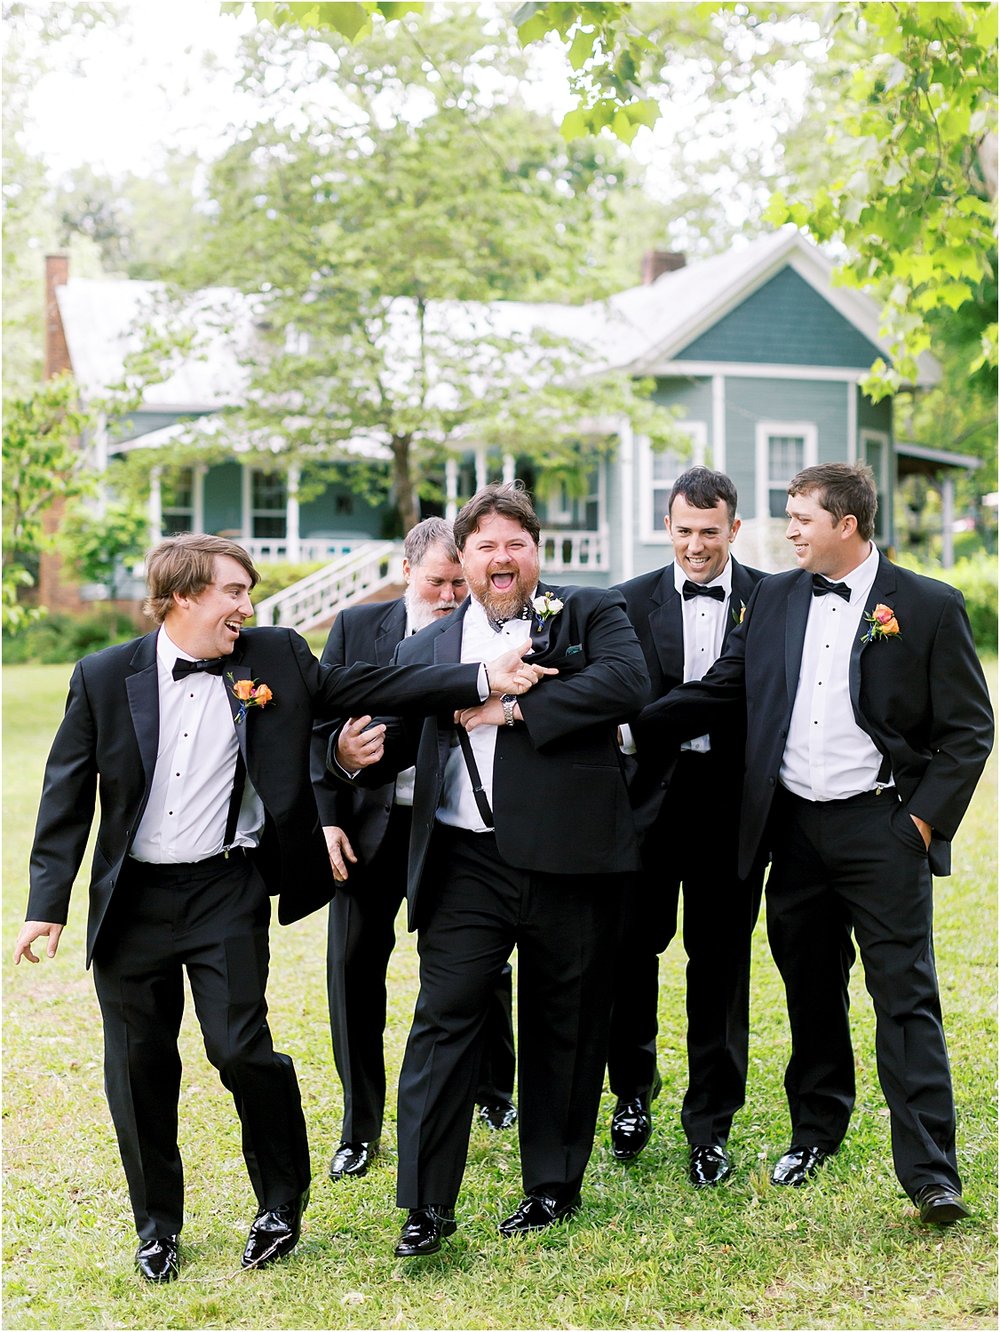 The Groom and his guys - Southern summer wedding 